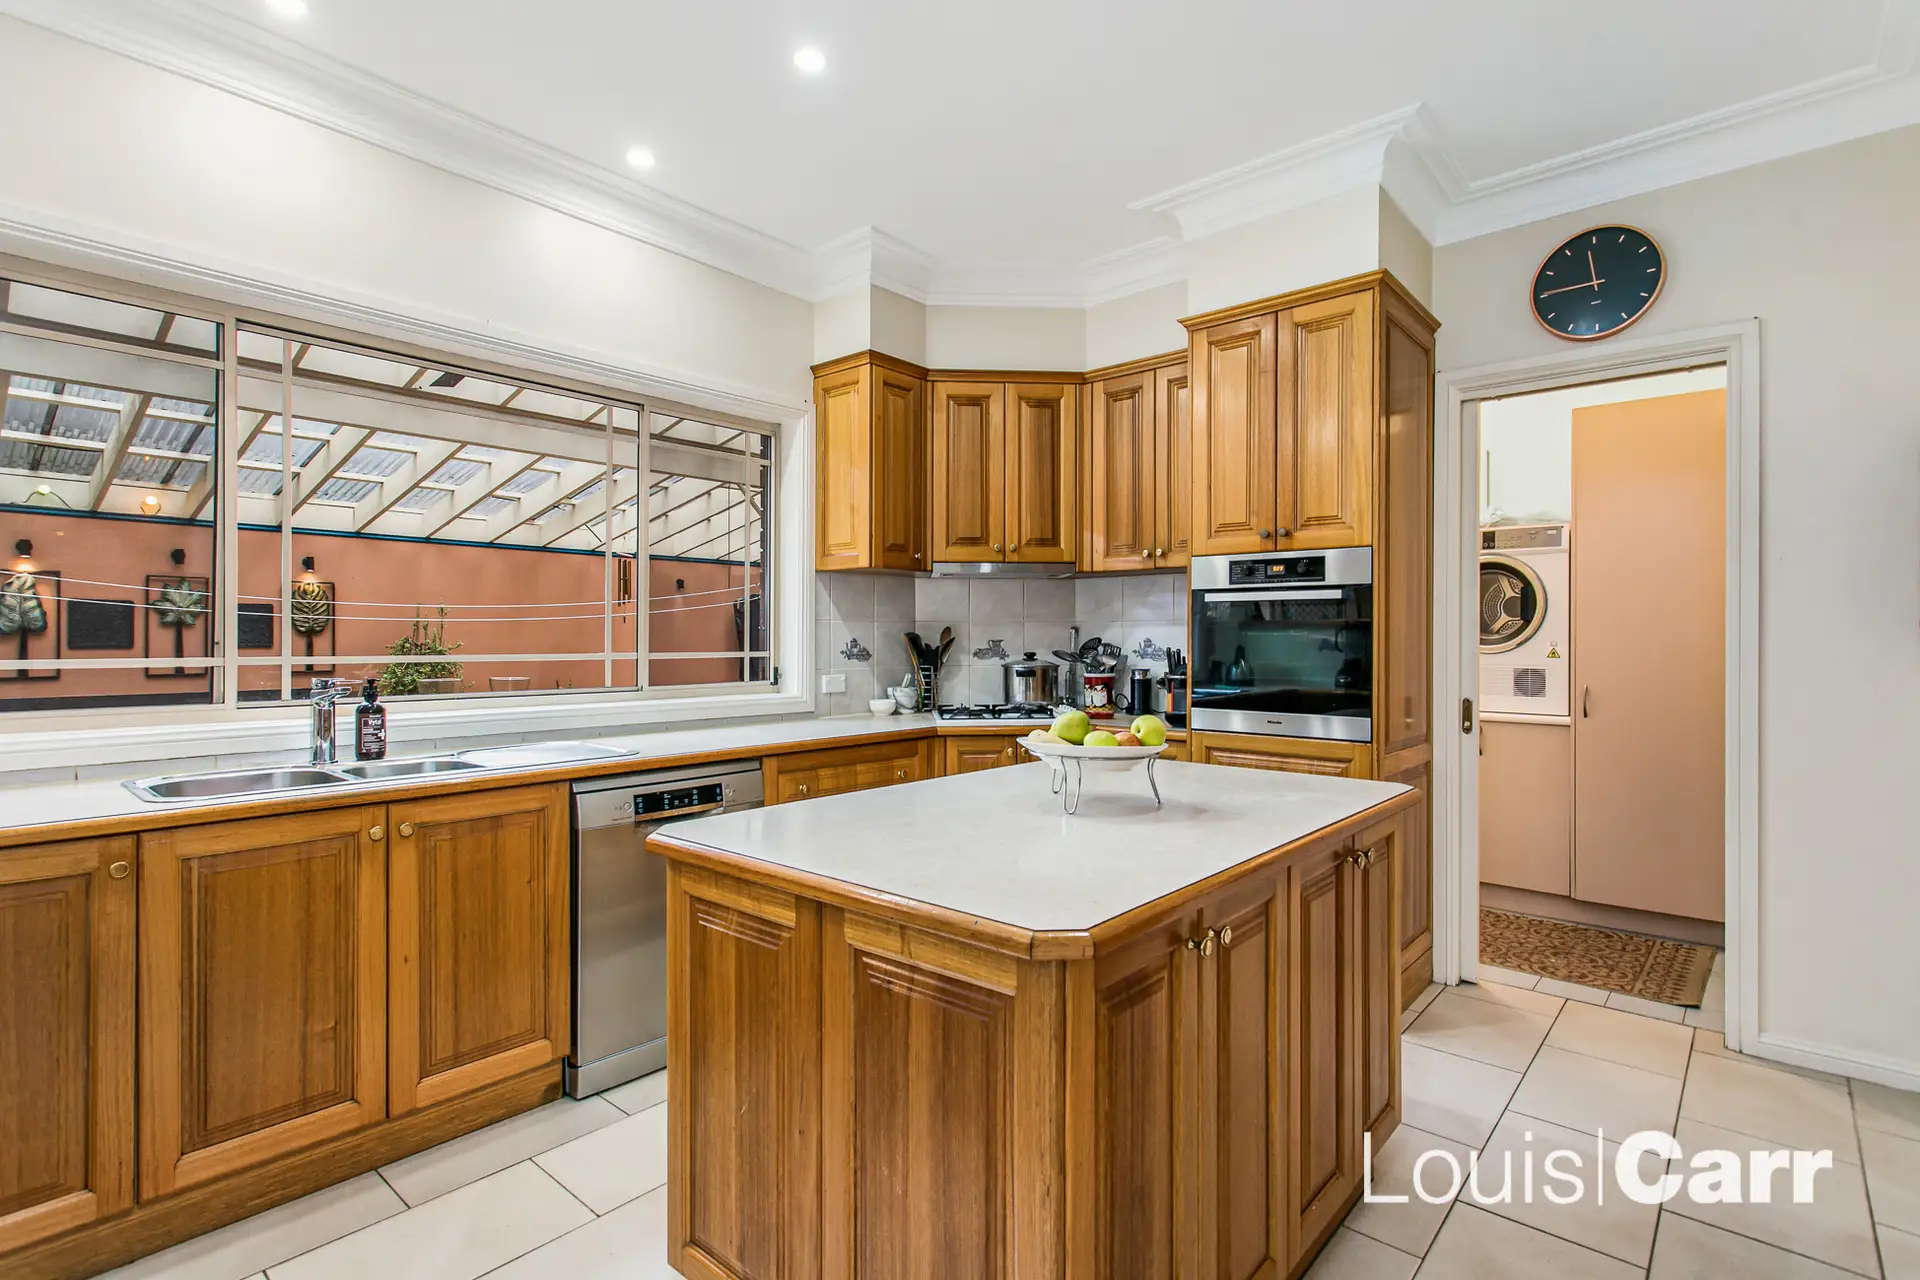 Photo #4: 31 Boldrewood Place, Cherrybrook - Sold by Louis Carr Real Estate